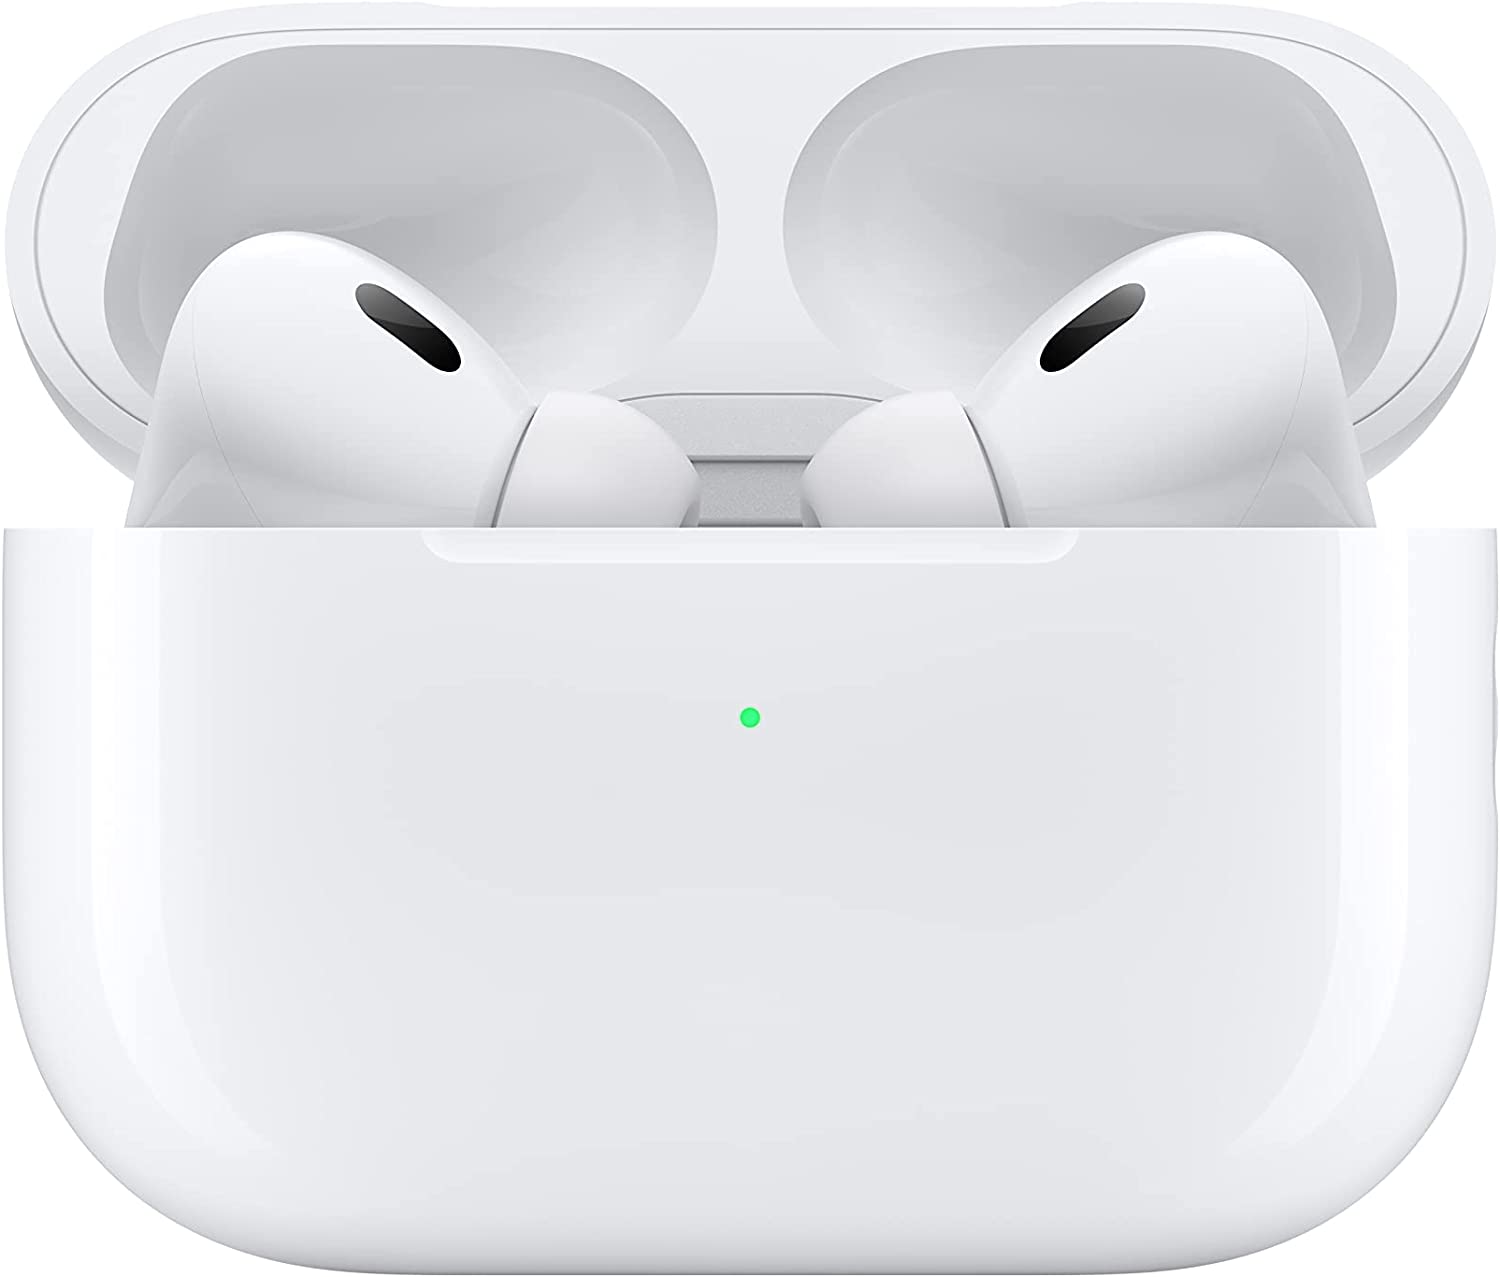 A pair of Apple AirPods resting inside their charging case.